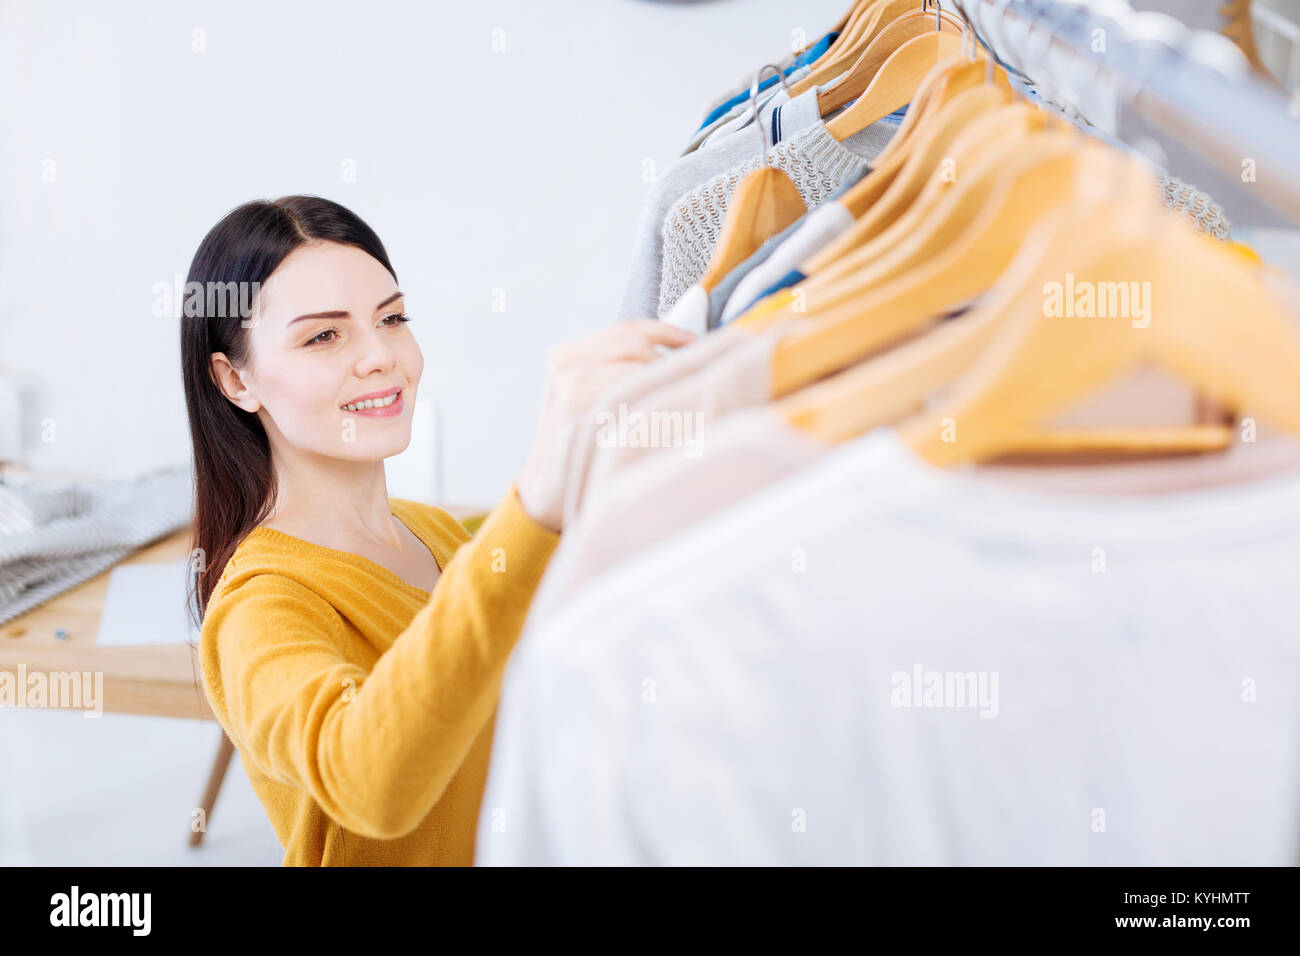 Positive young woman smiling while looking at the new clothes Stock Photo